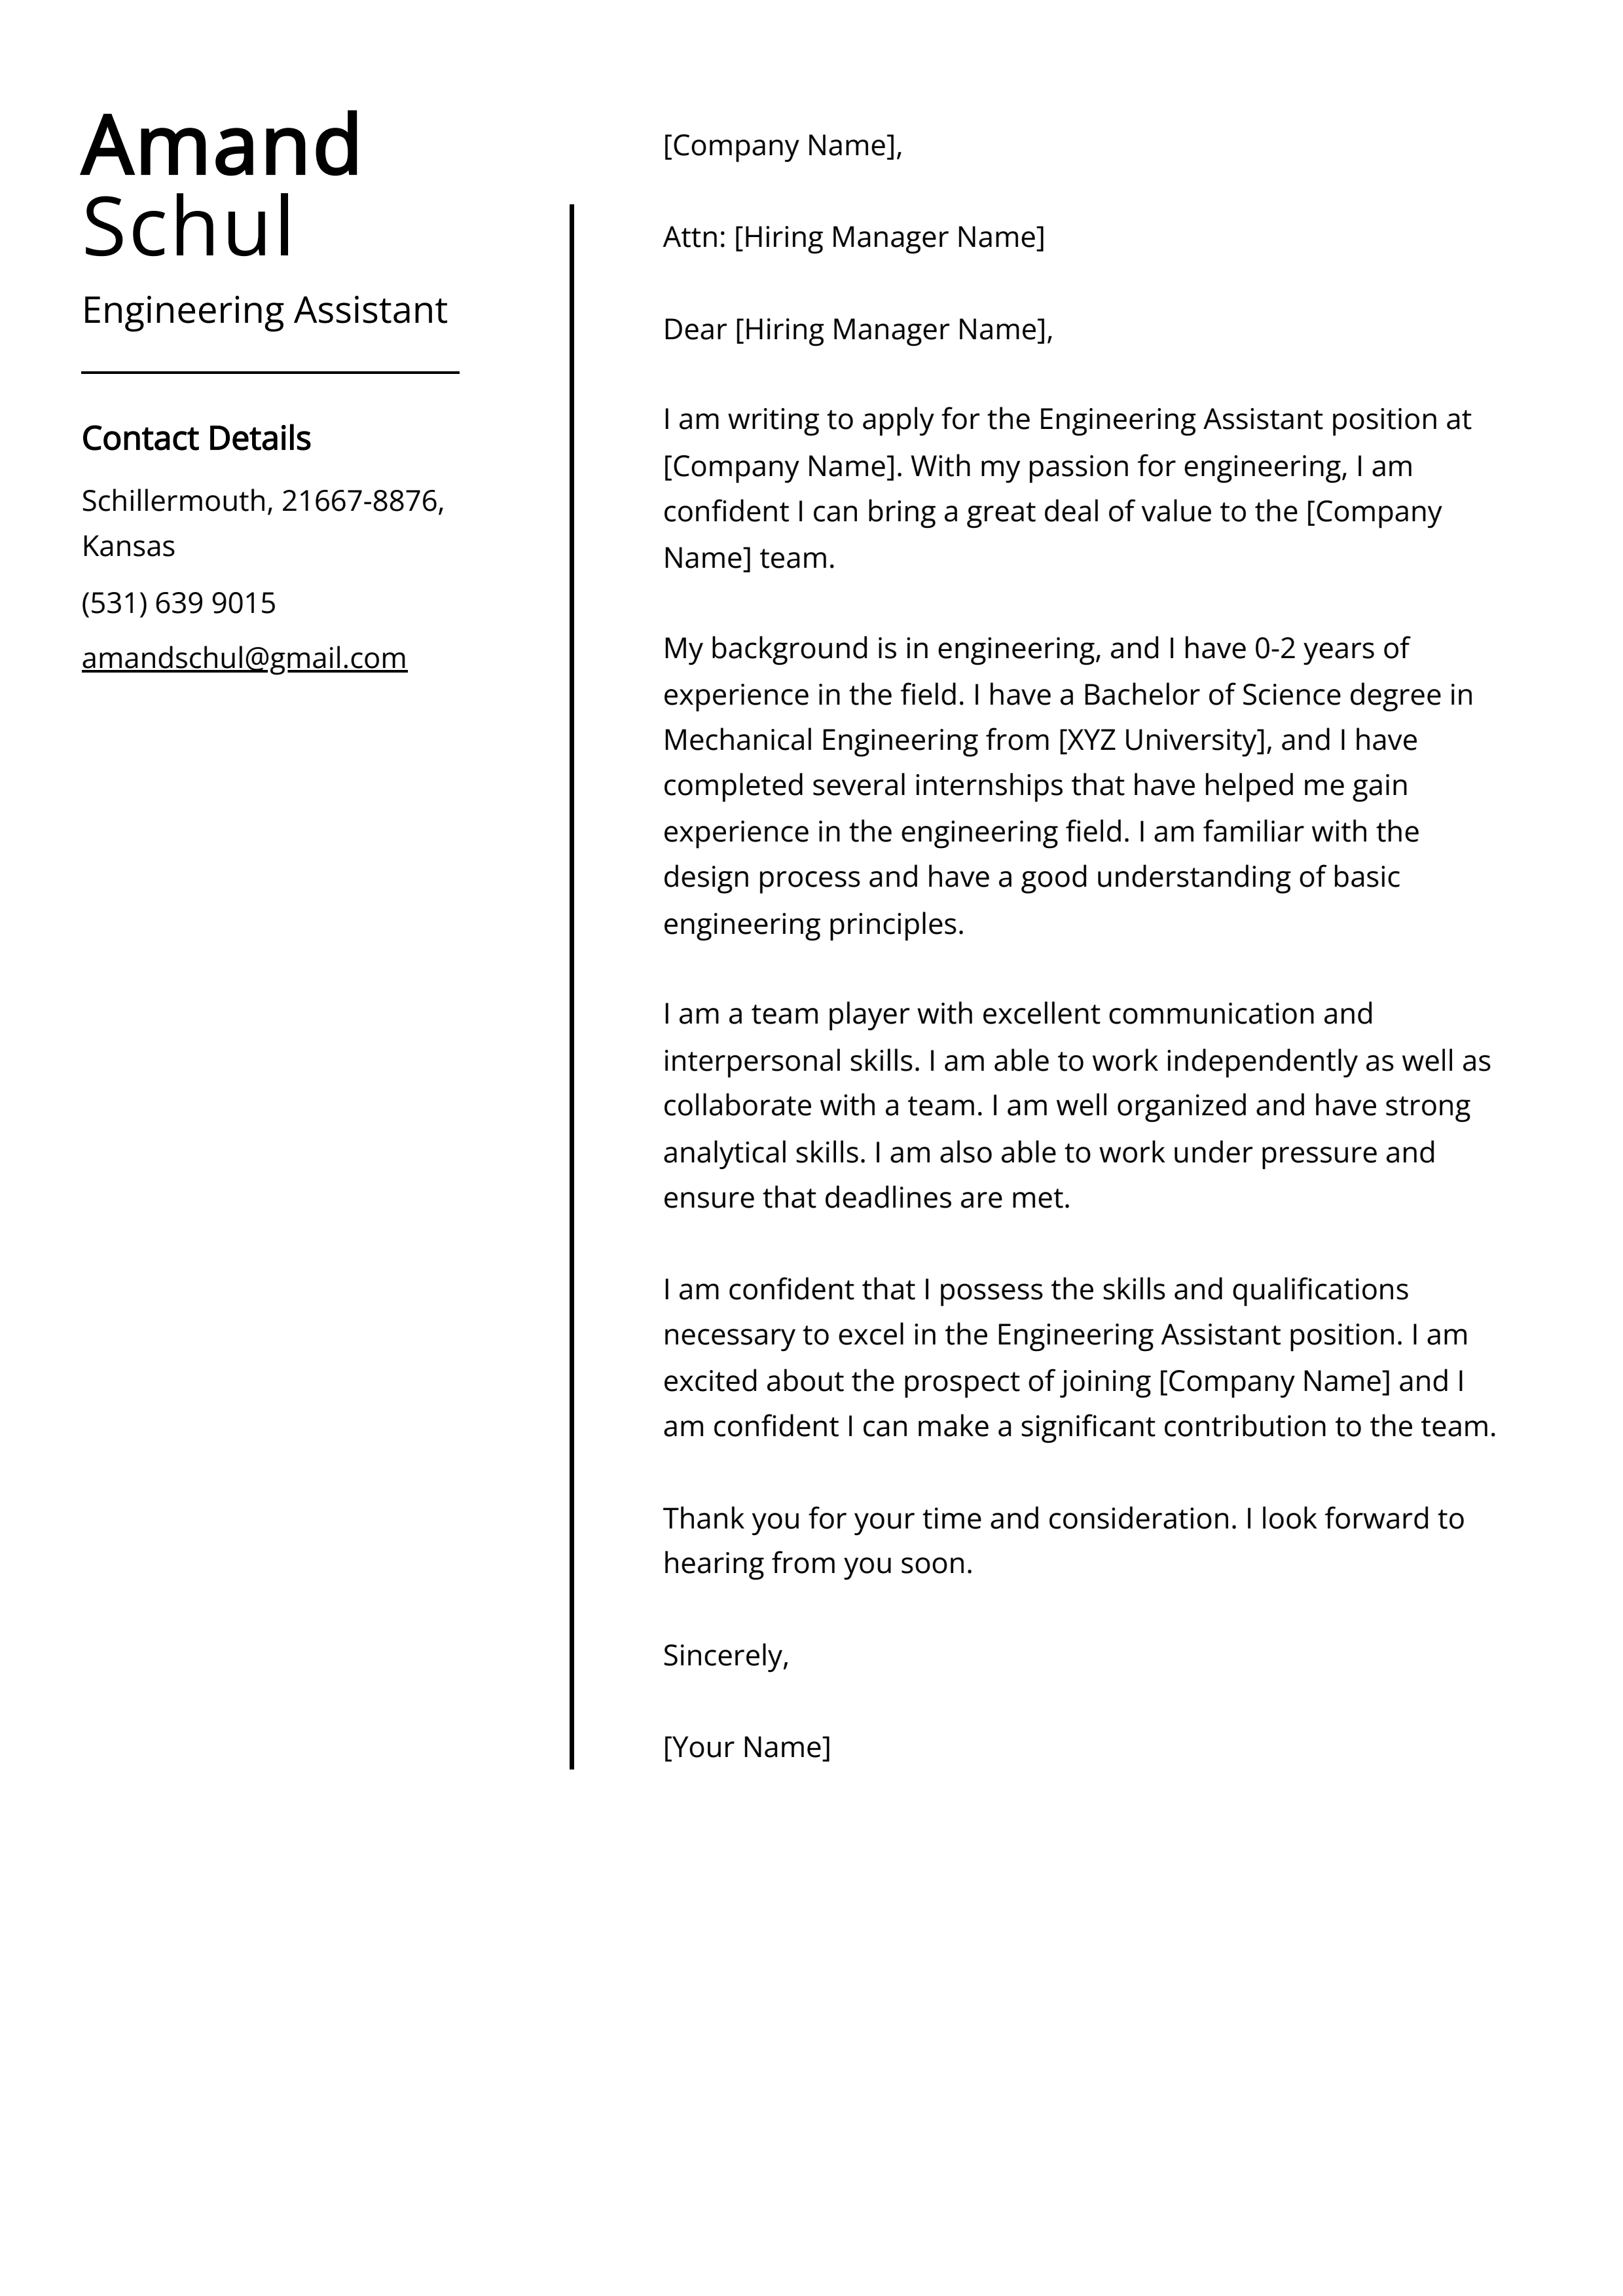 Engineering Assistant Cover Letter Example